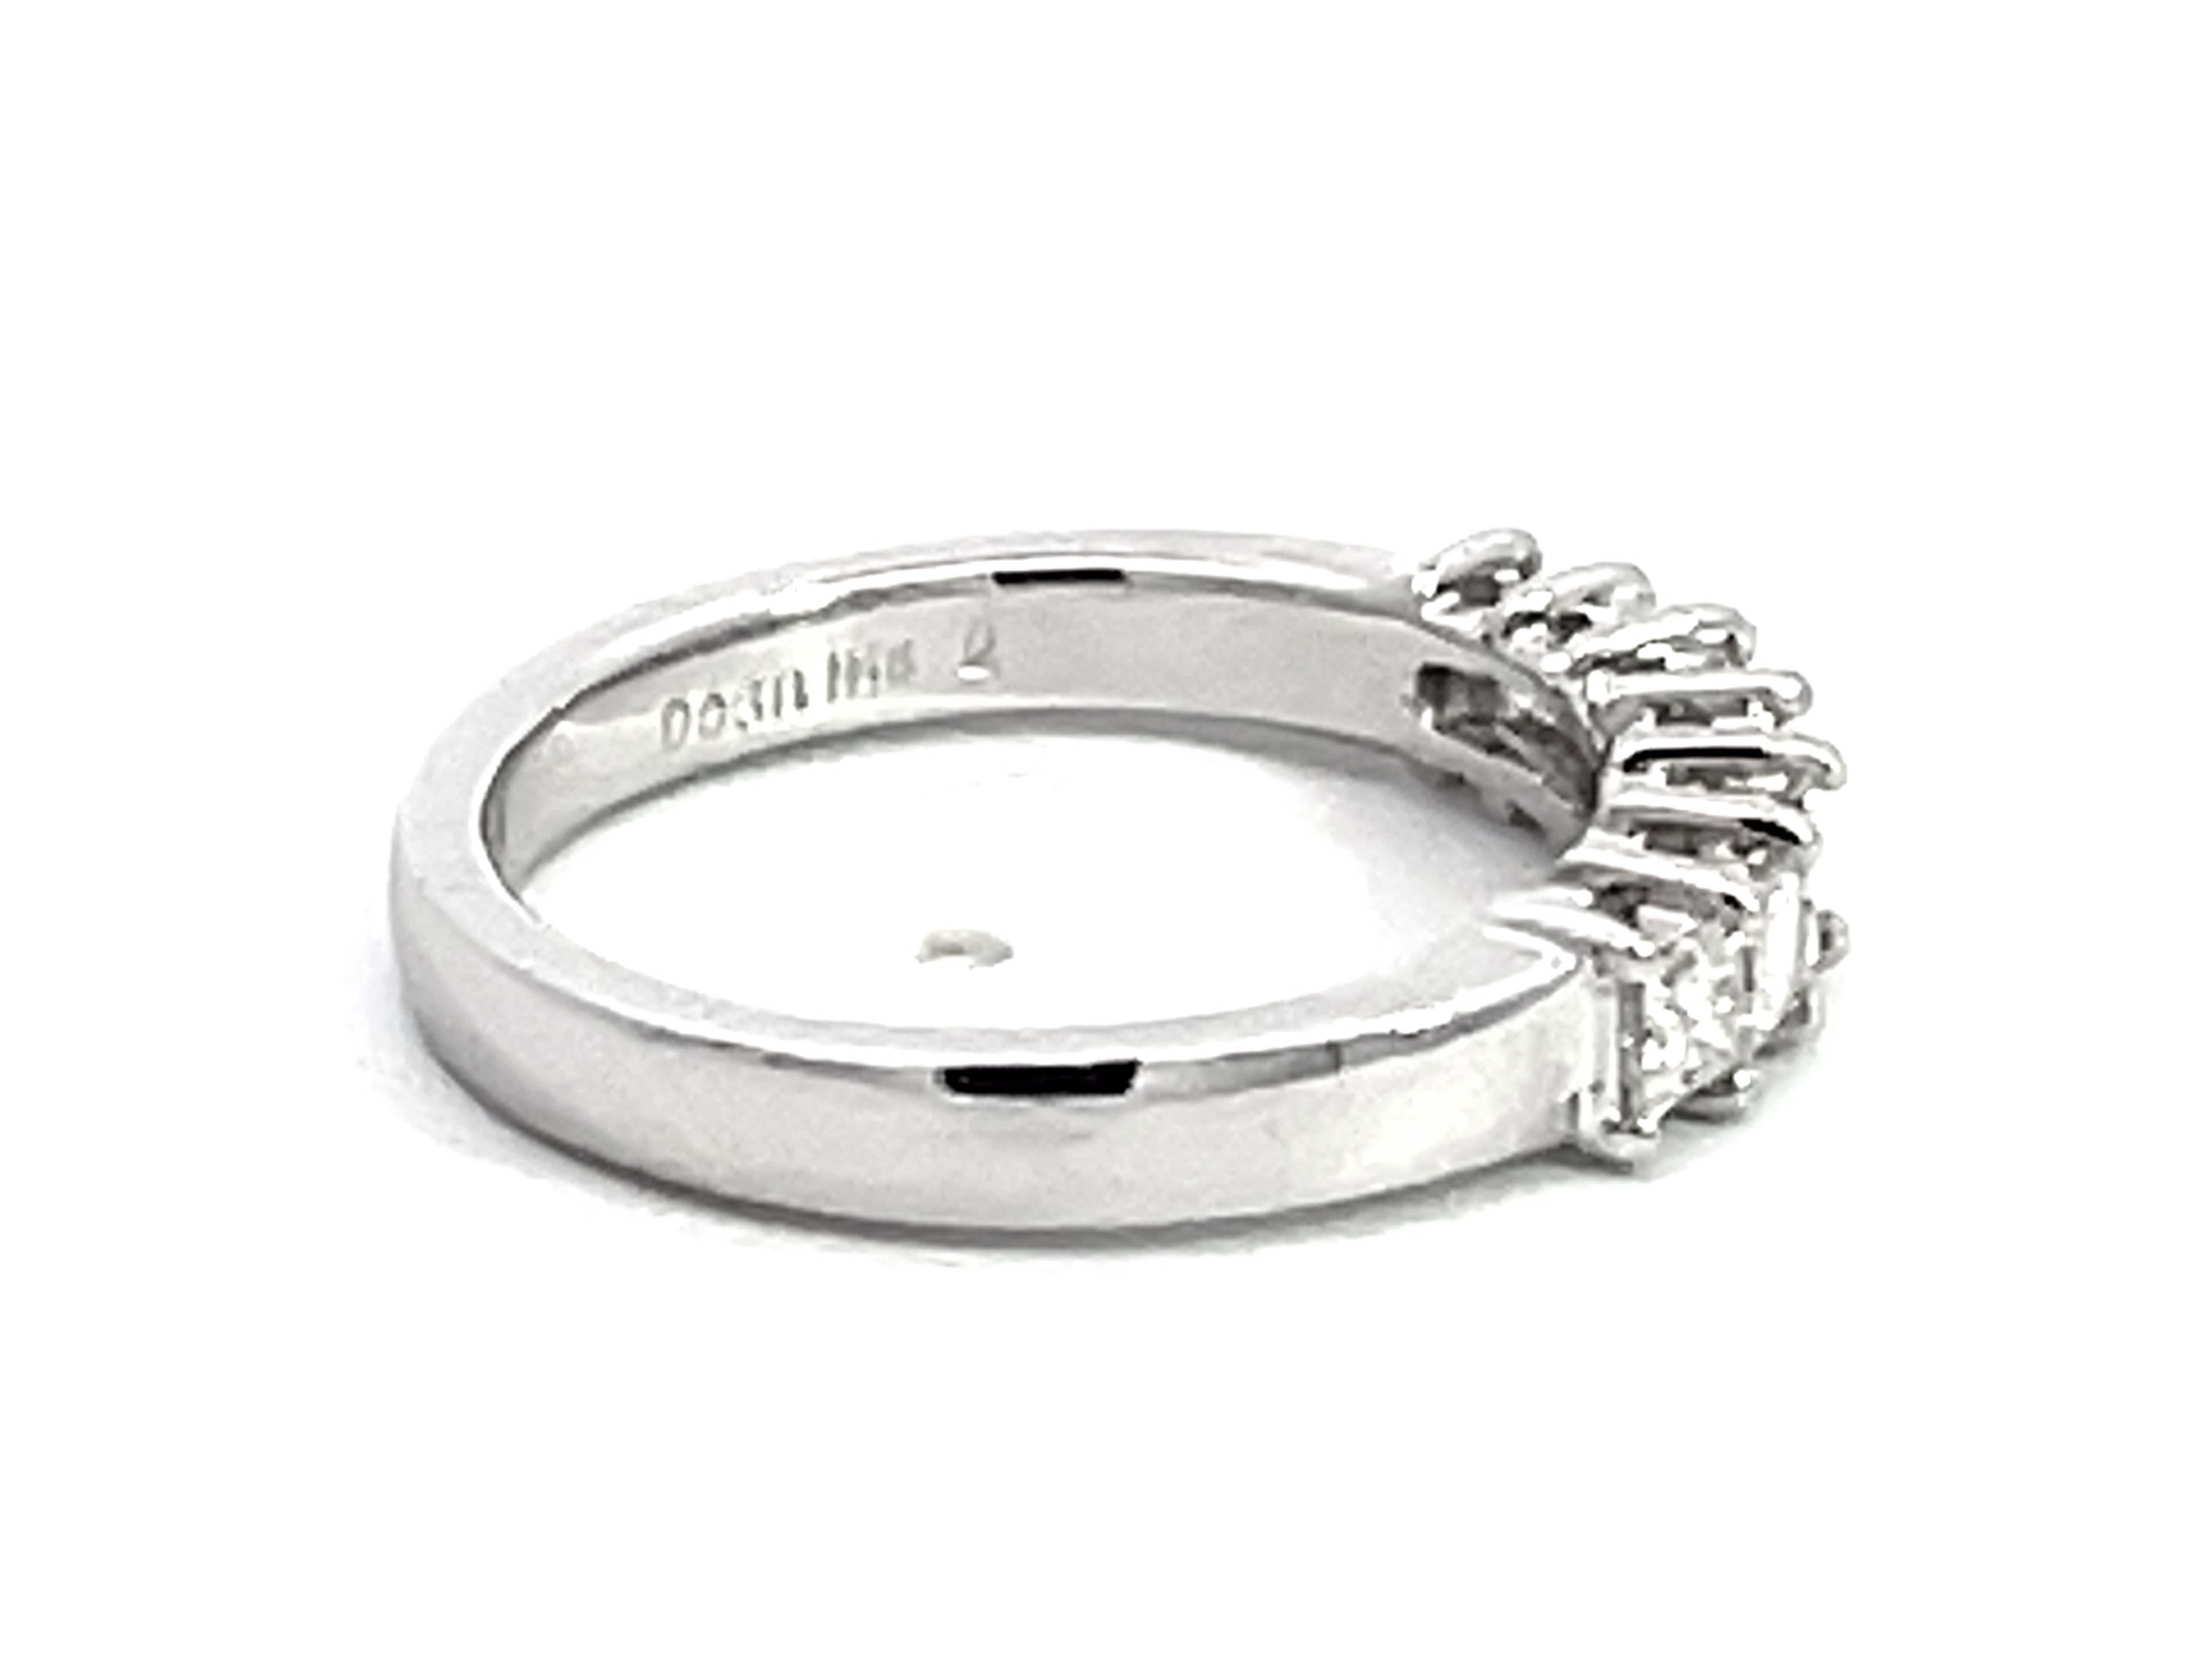 Women's or Men's Princess Cut Prong Set Diamond Ring Solid 18k White Gold For Sale